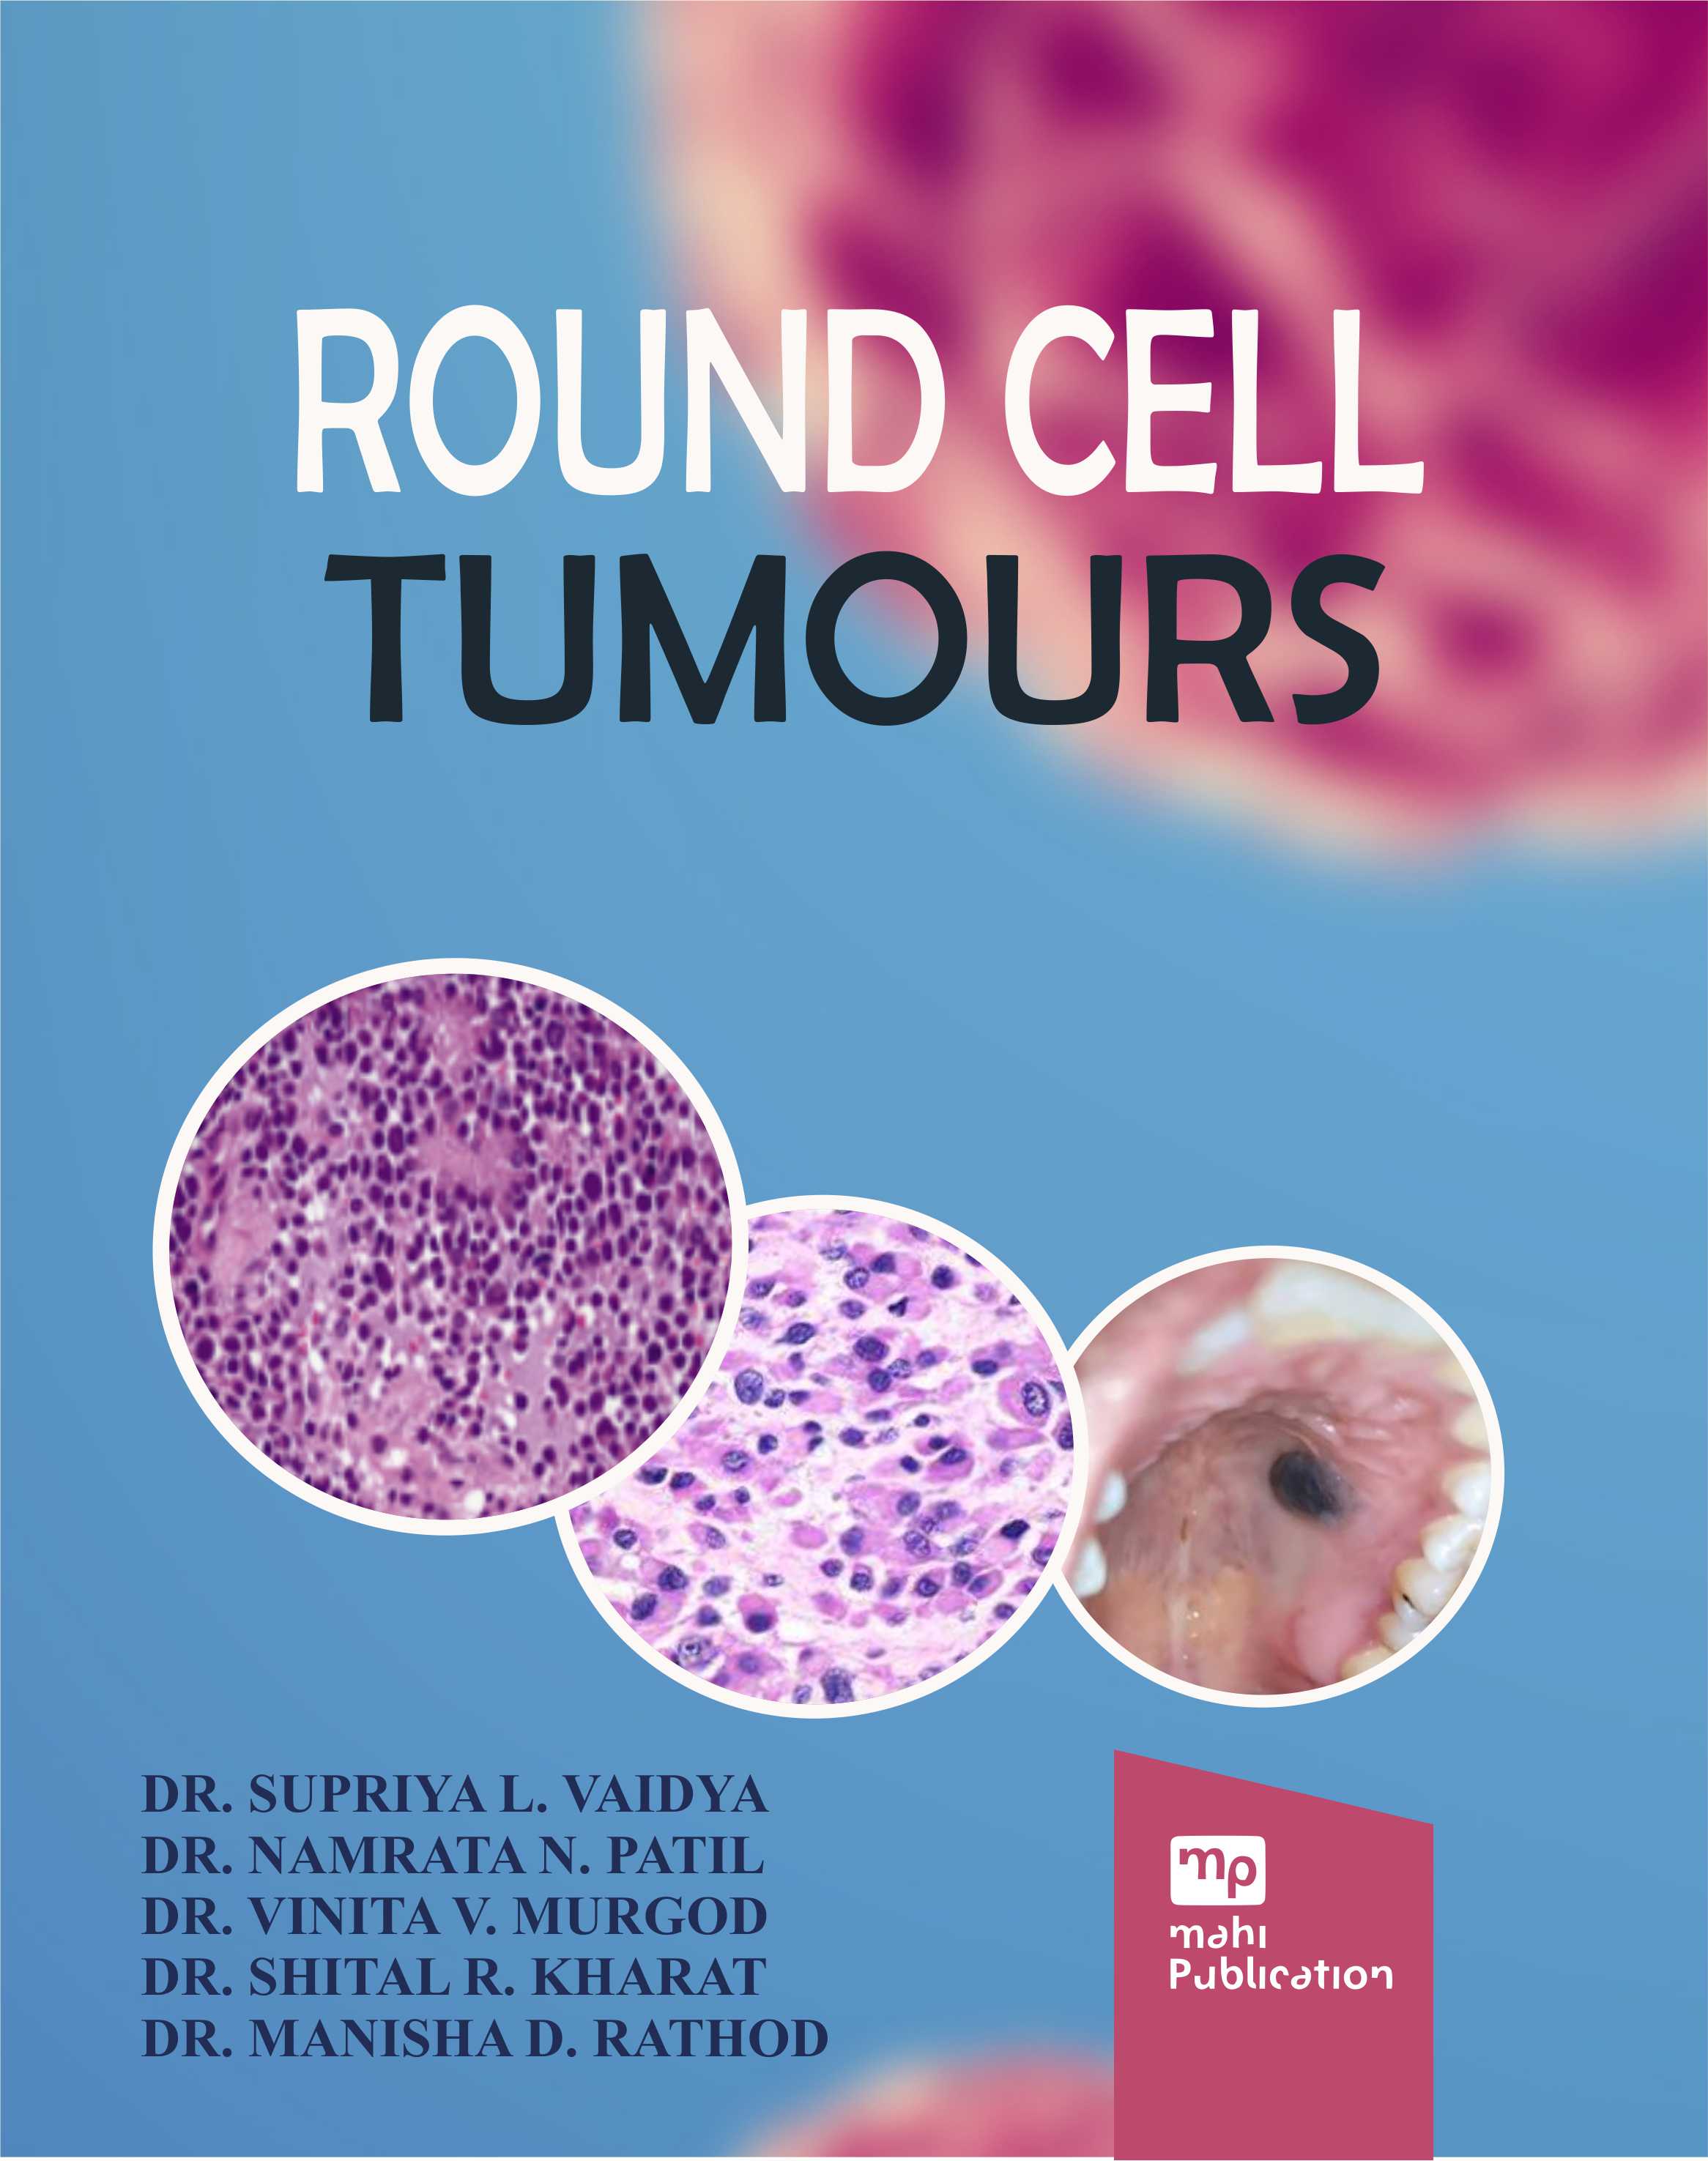 Round Cell Tumours